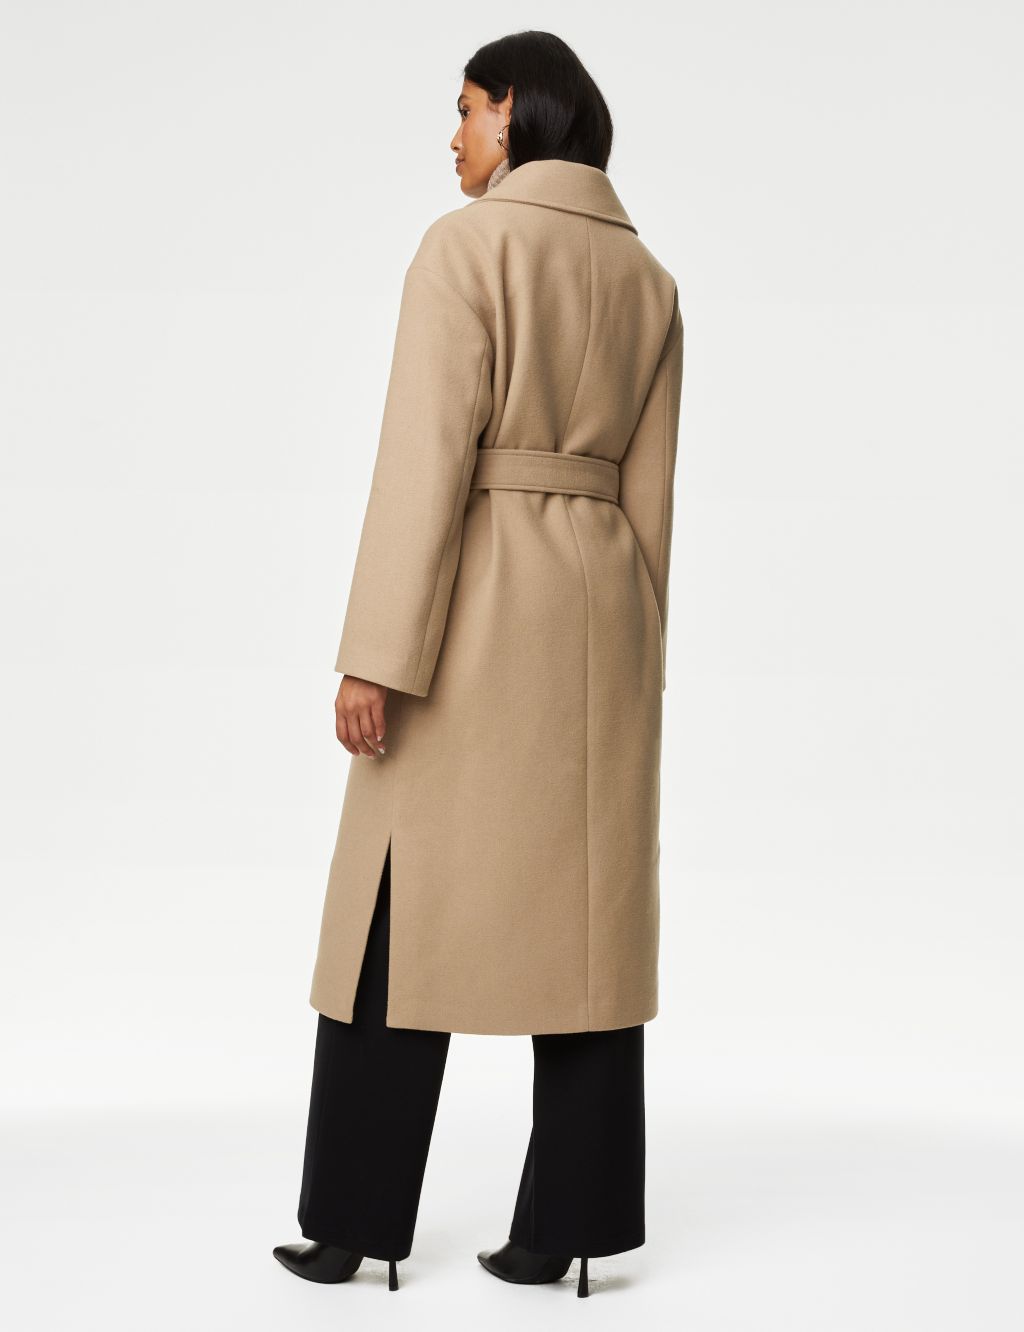 Belted Relaxed Coat with Wool image 5